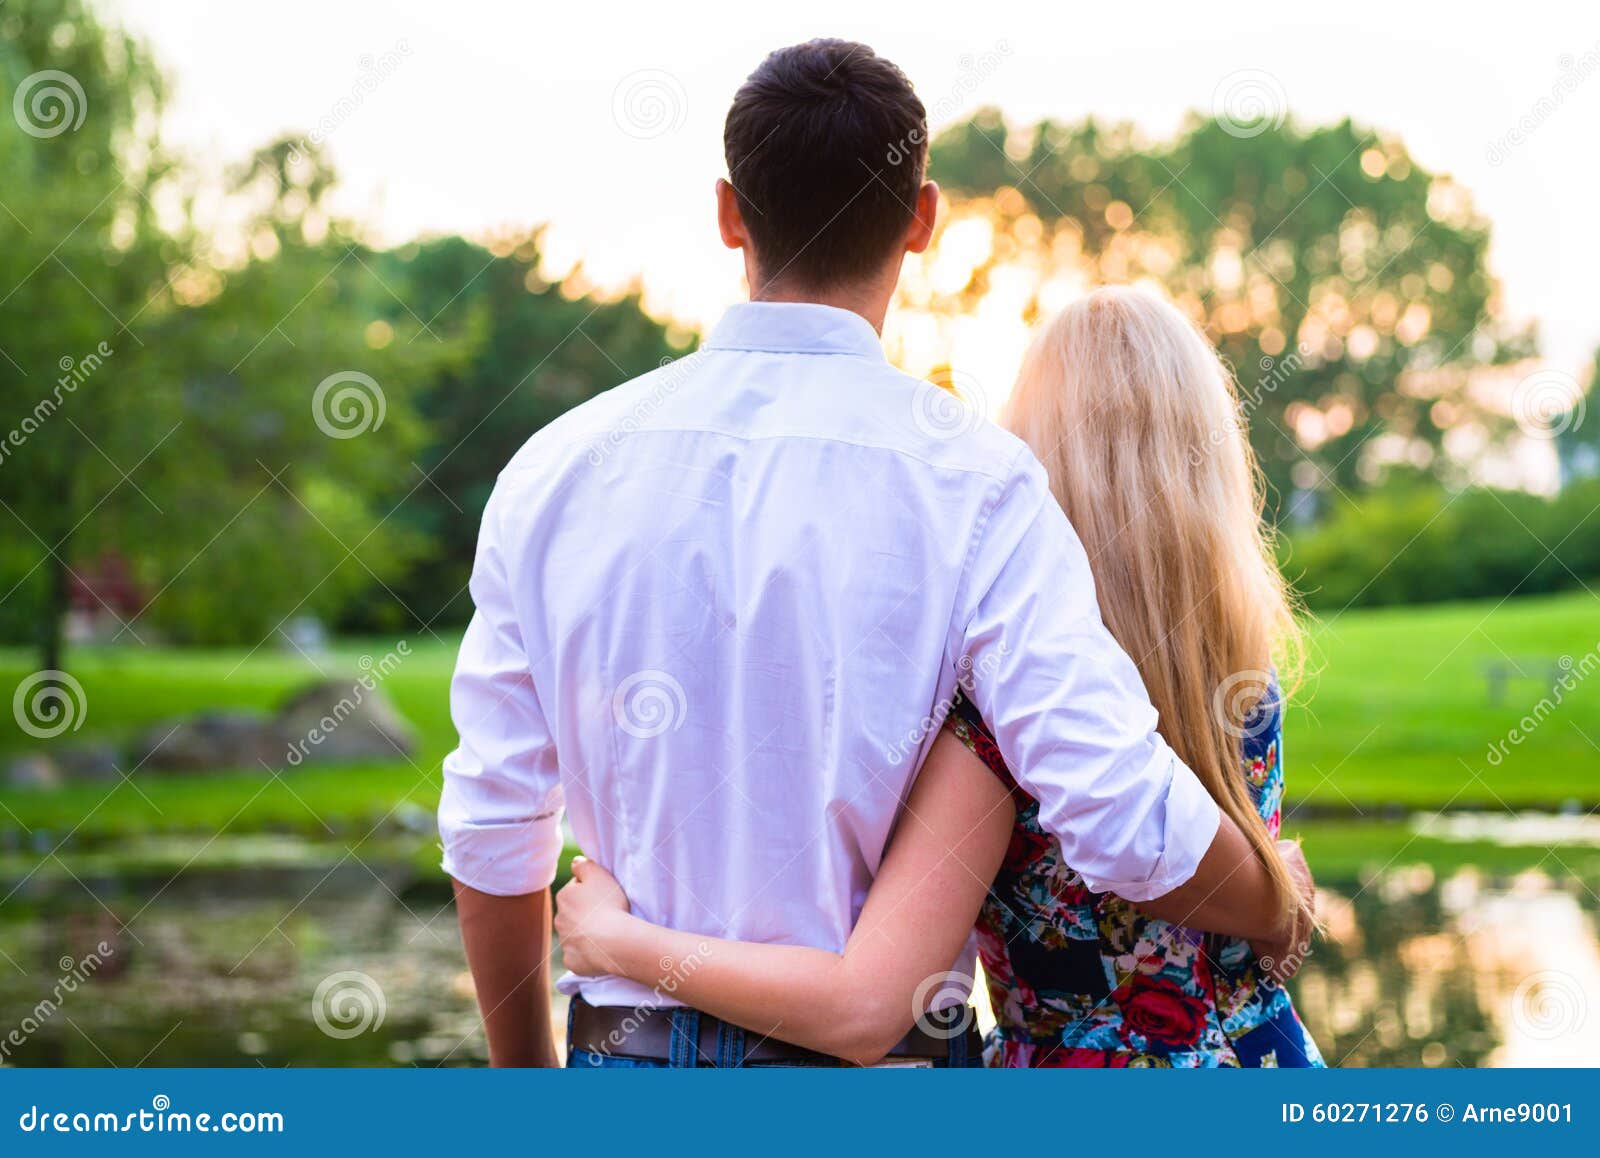 Couple Dreaming Their Life Together Looking In Sunset Stock Photo